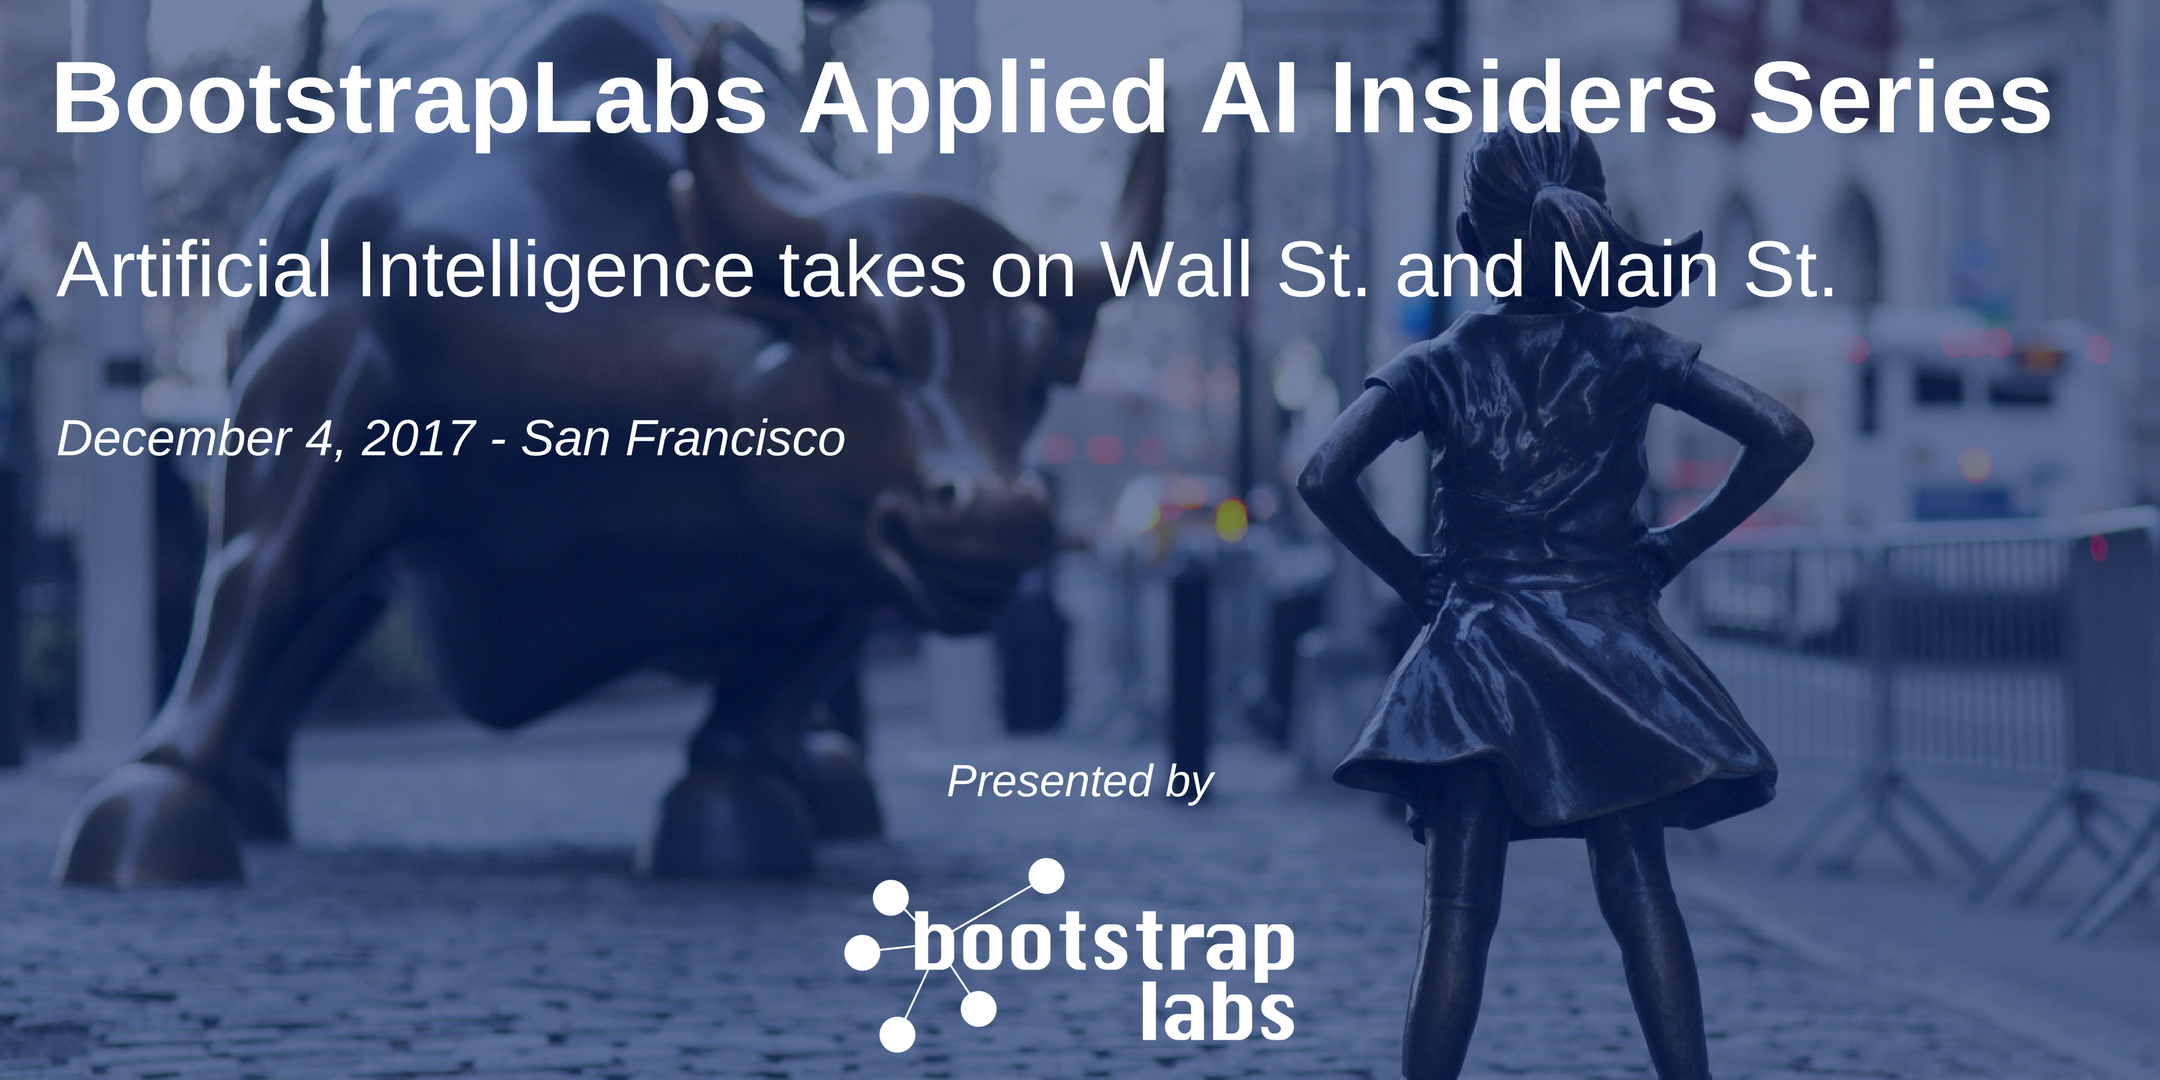 BootstrapLabs Applied AI Insiders FinTech